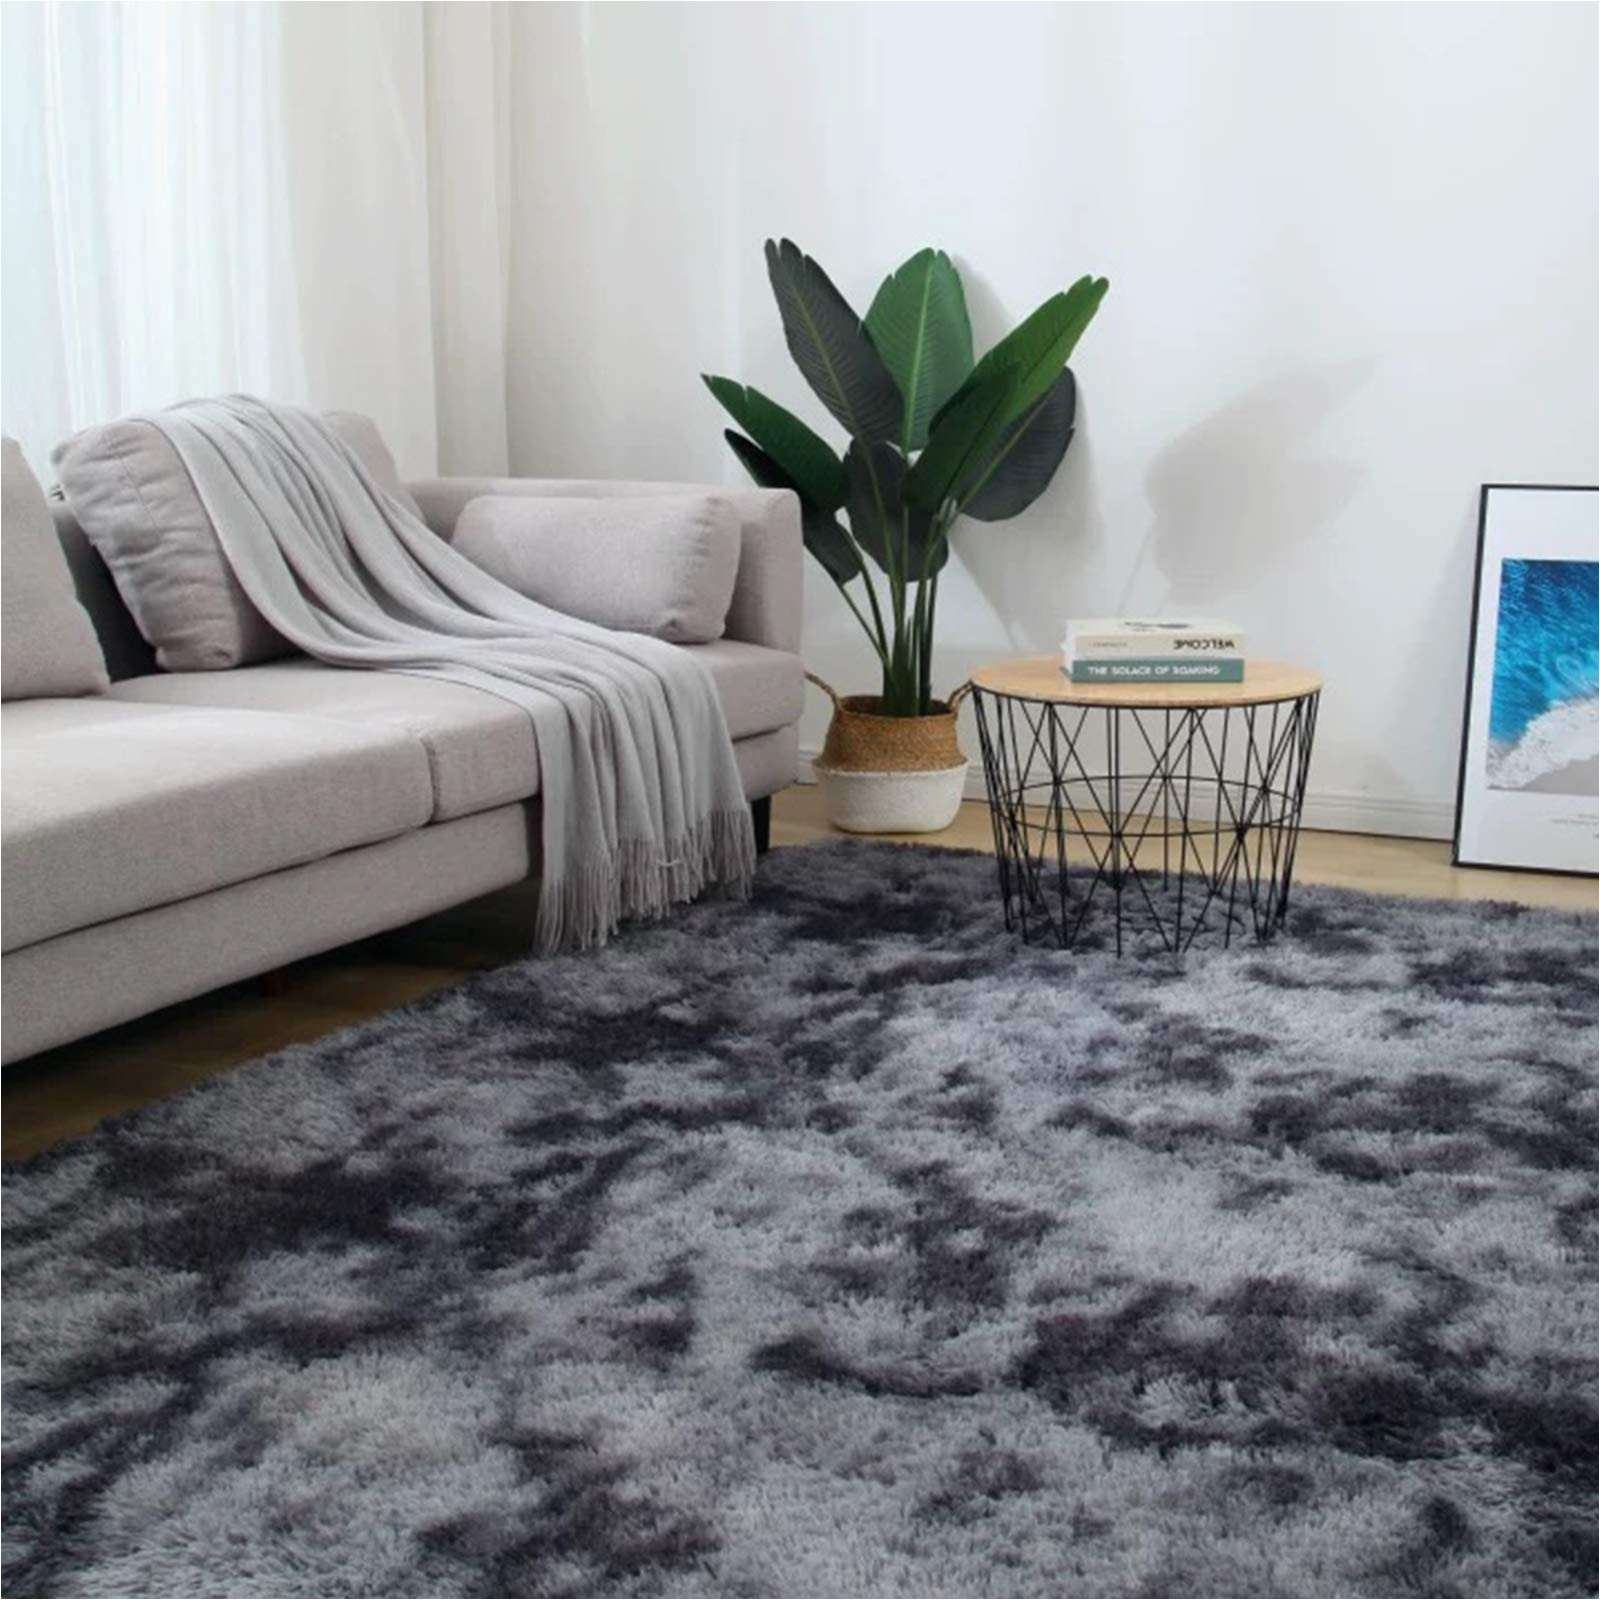 Modern area Rugs 5 X 8 5×8 Dark Grey area Rugs Modern Home Decorate soft Fluffy Carpets for Living Room Bedroom Kids Room Fuzzy Plush Non-slip Floor area Rug Fluffy Indoor …